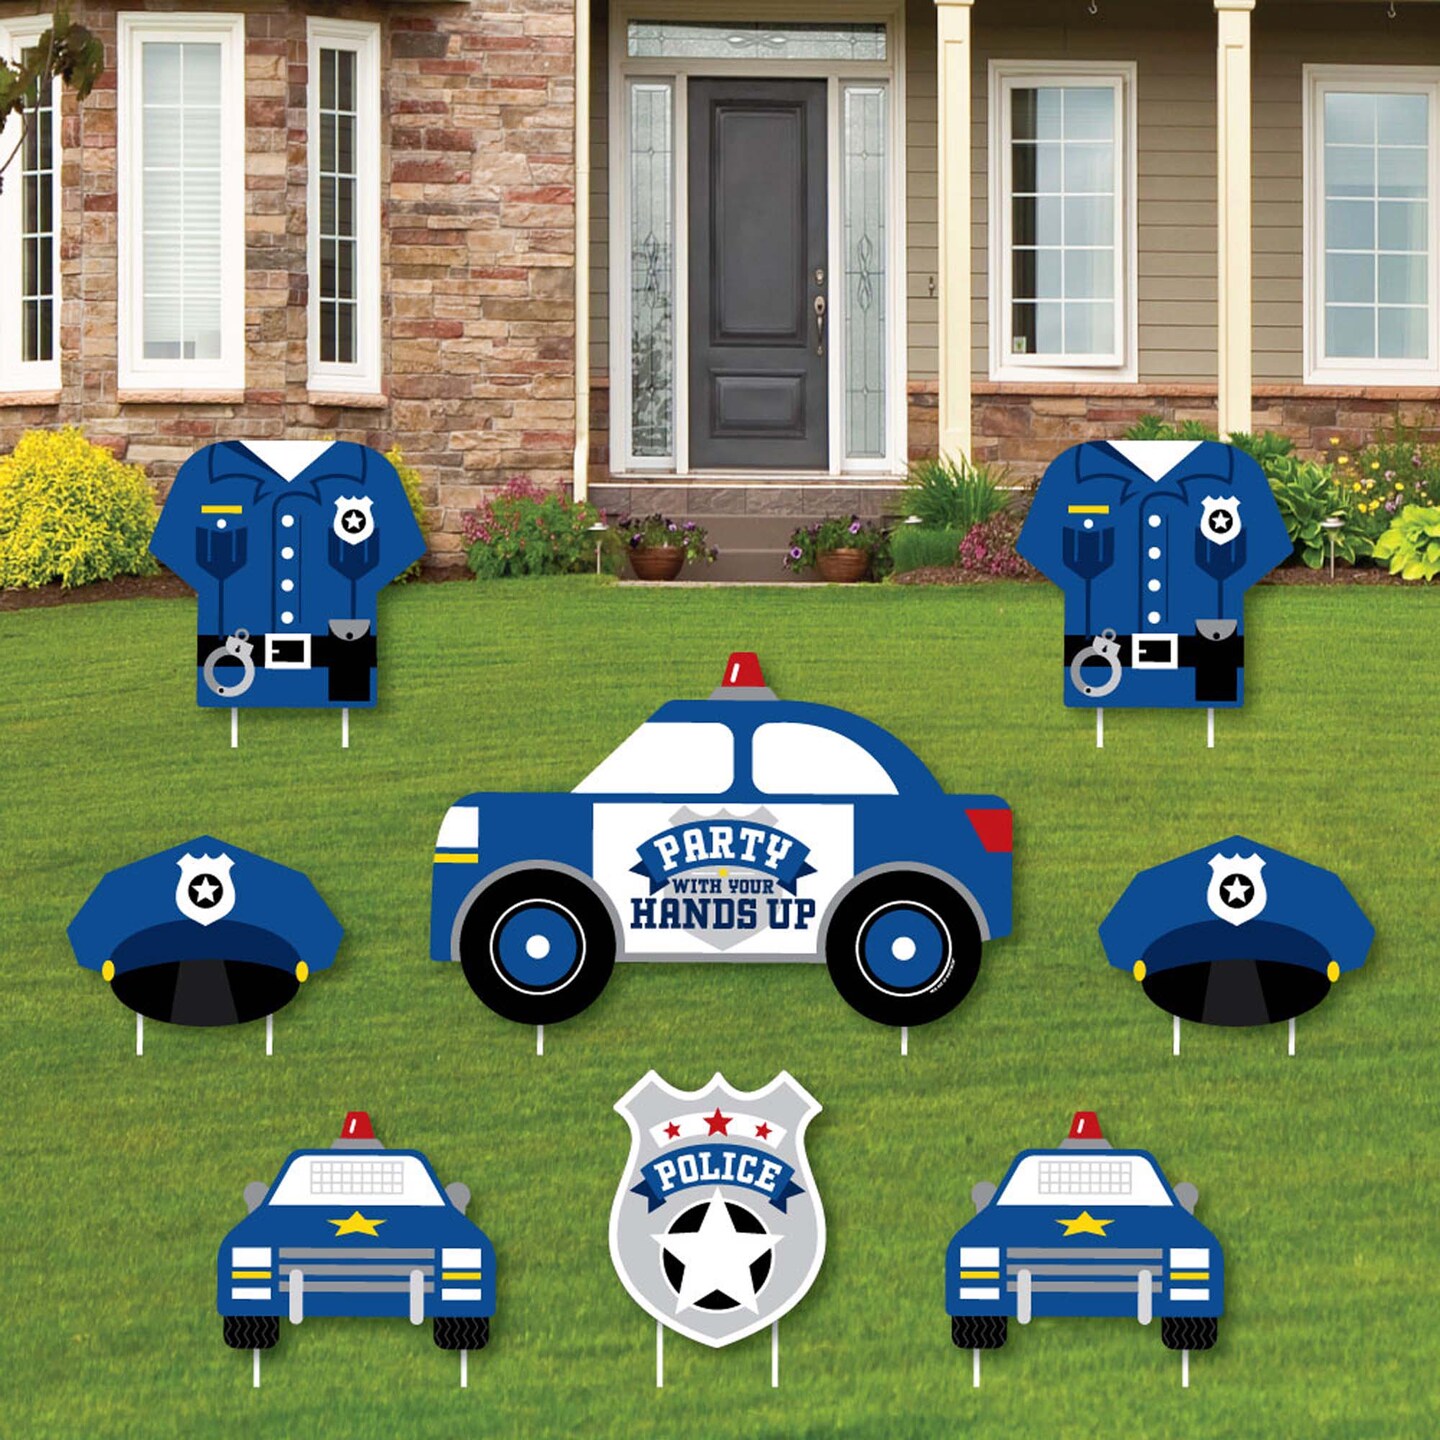 Big Dot of Happiness Calling All Units - Police - Yard Sign and Outdoor Lawn Decorations - Cop Birthday Party or Baby Shower Yard Signs - Set of 8